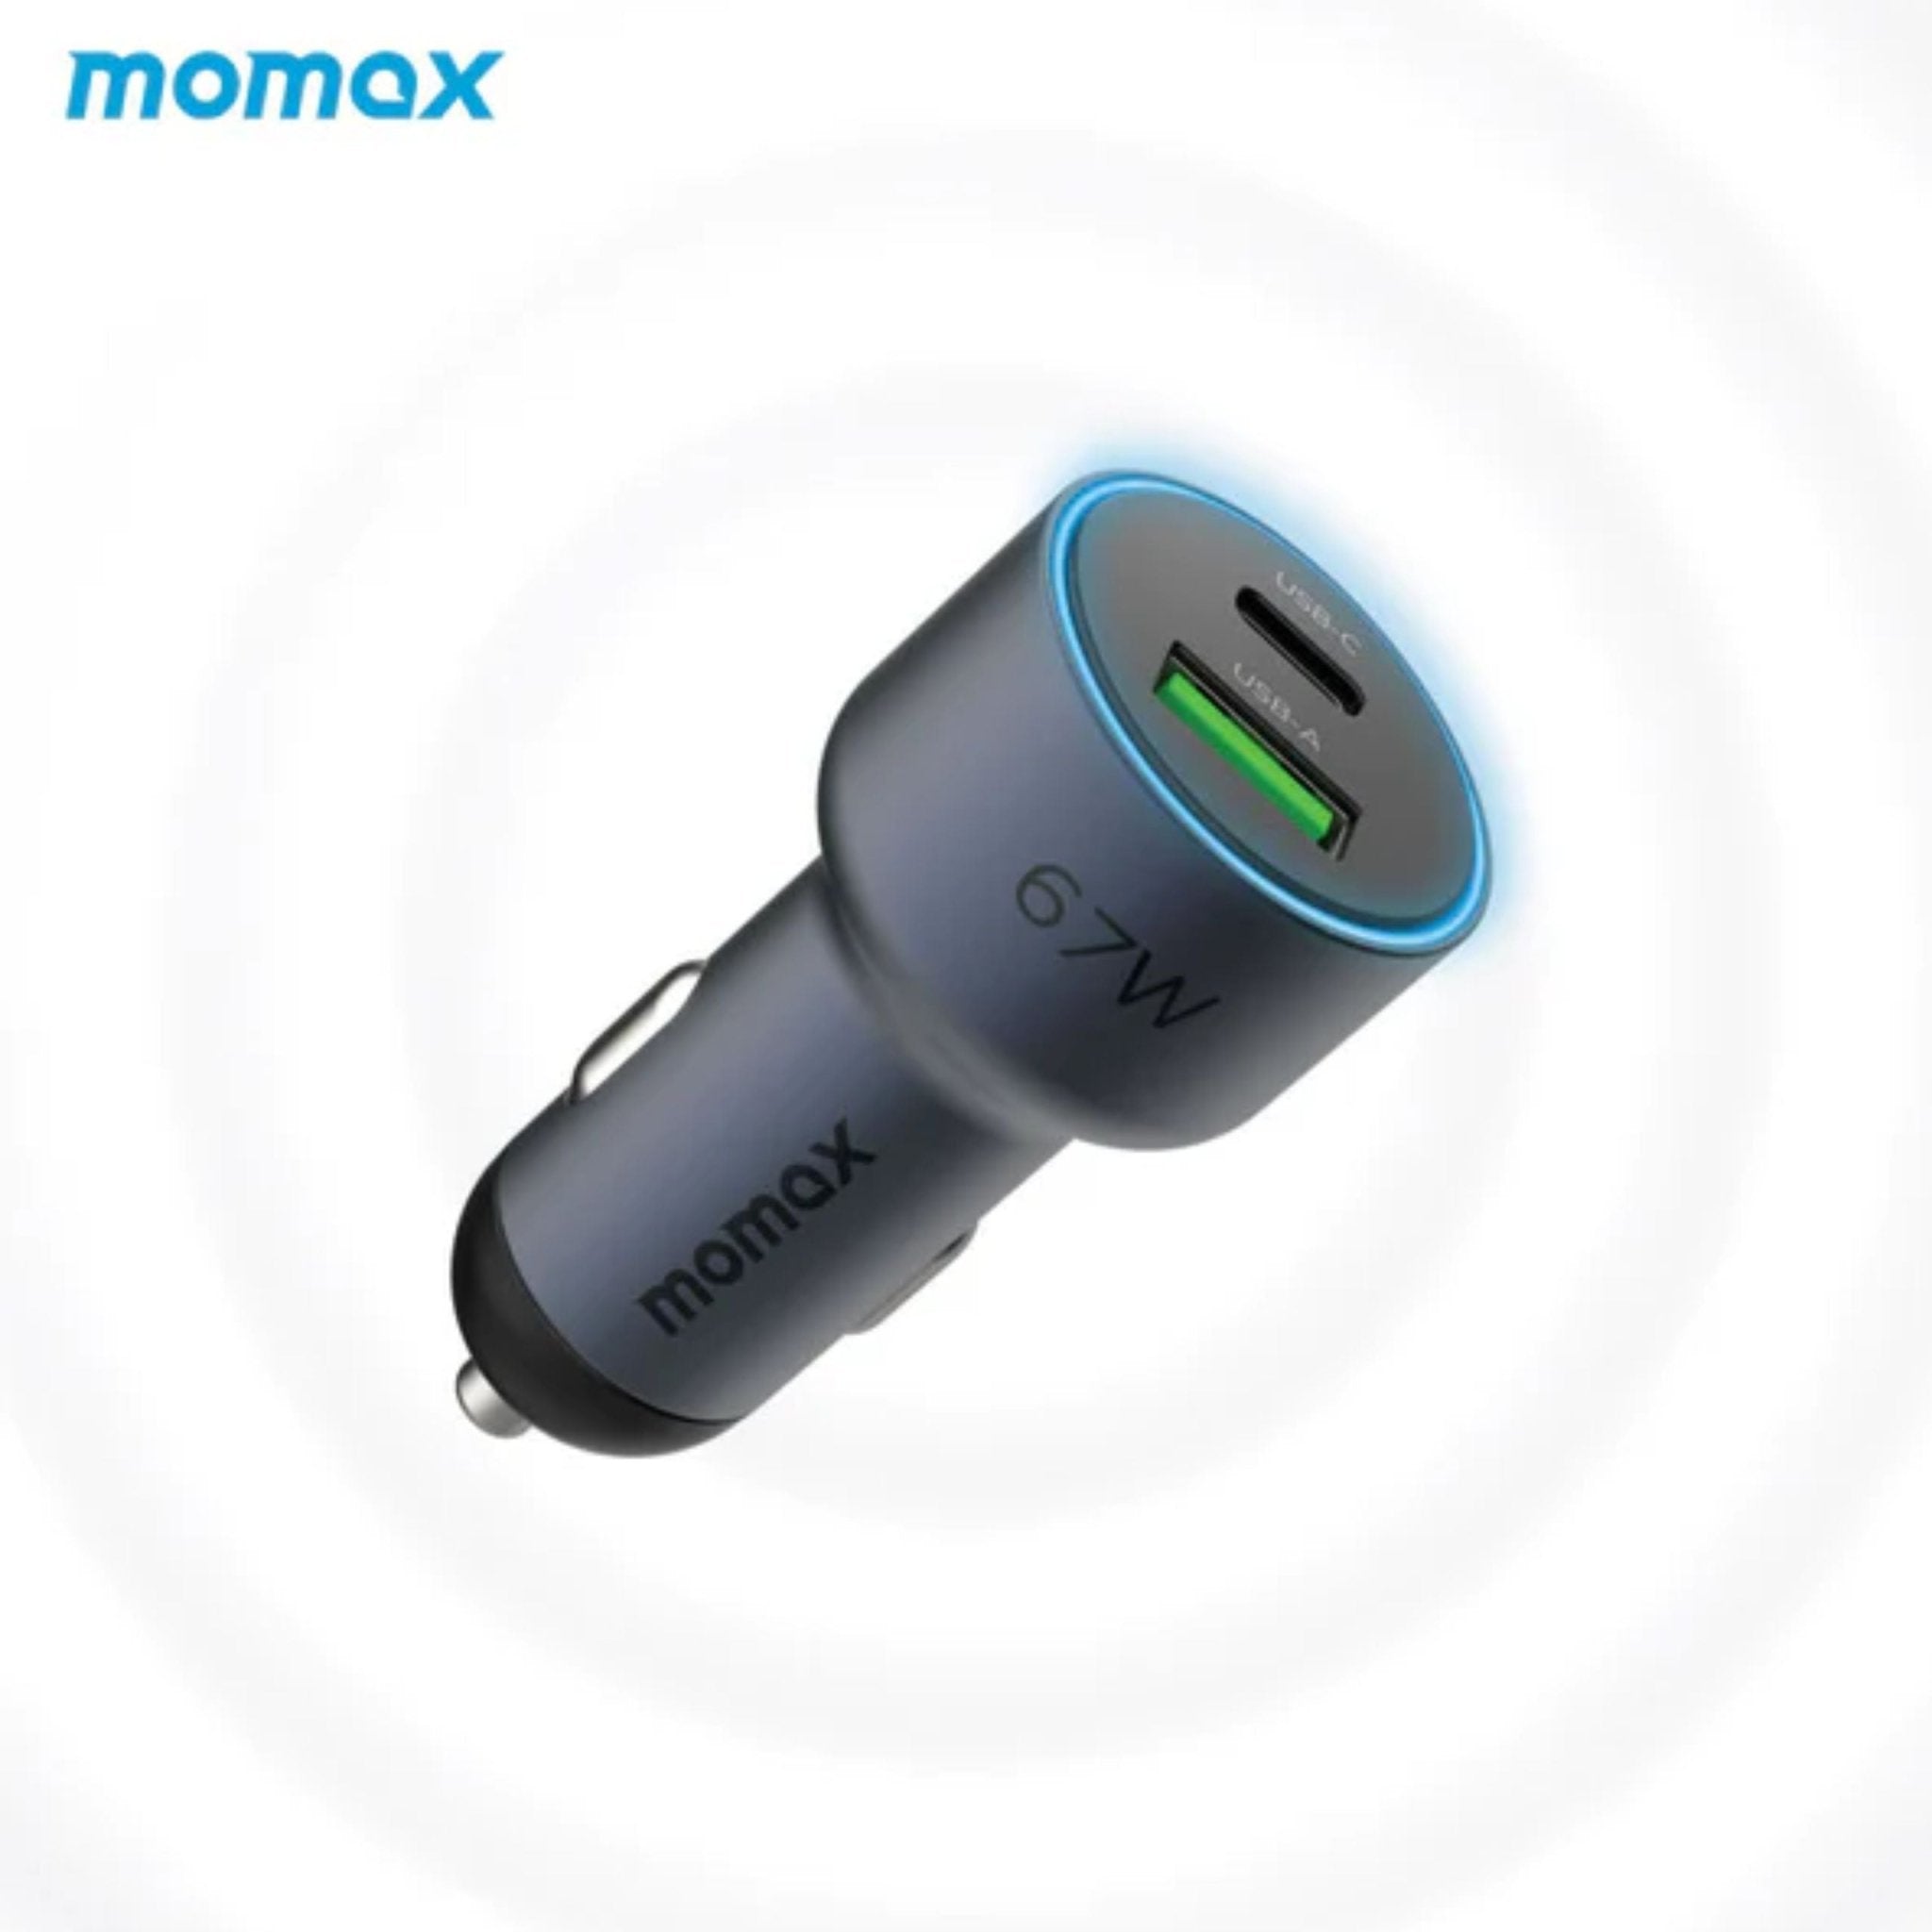 Momax Move 67W Dual Port Car Charger - Gray